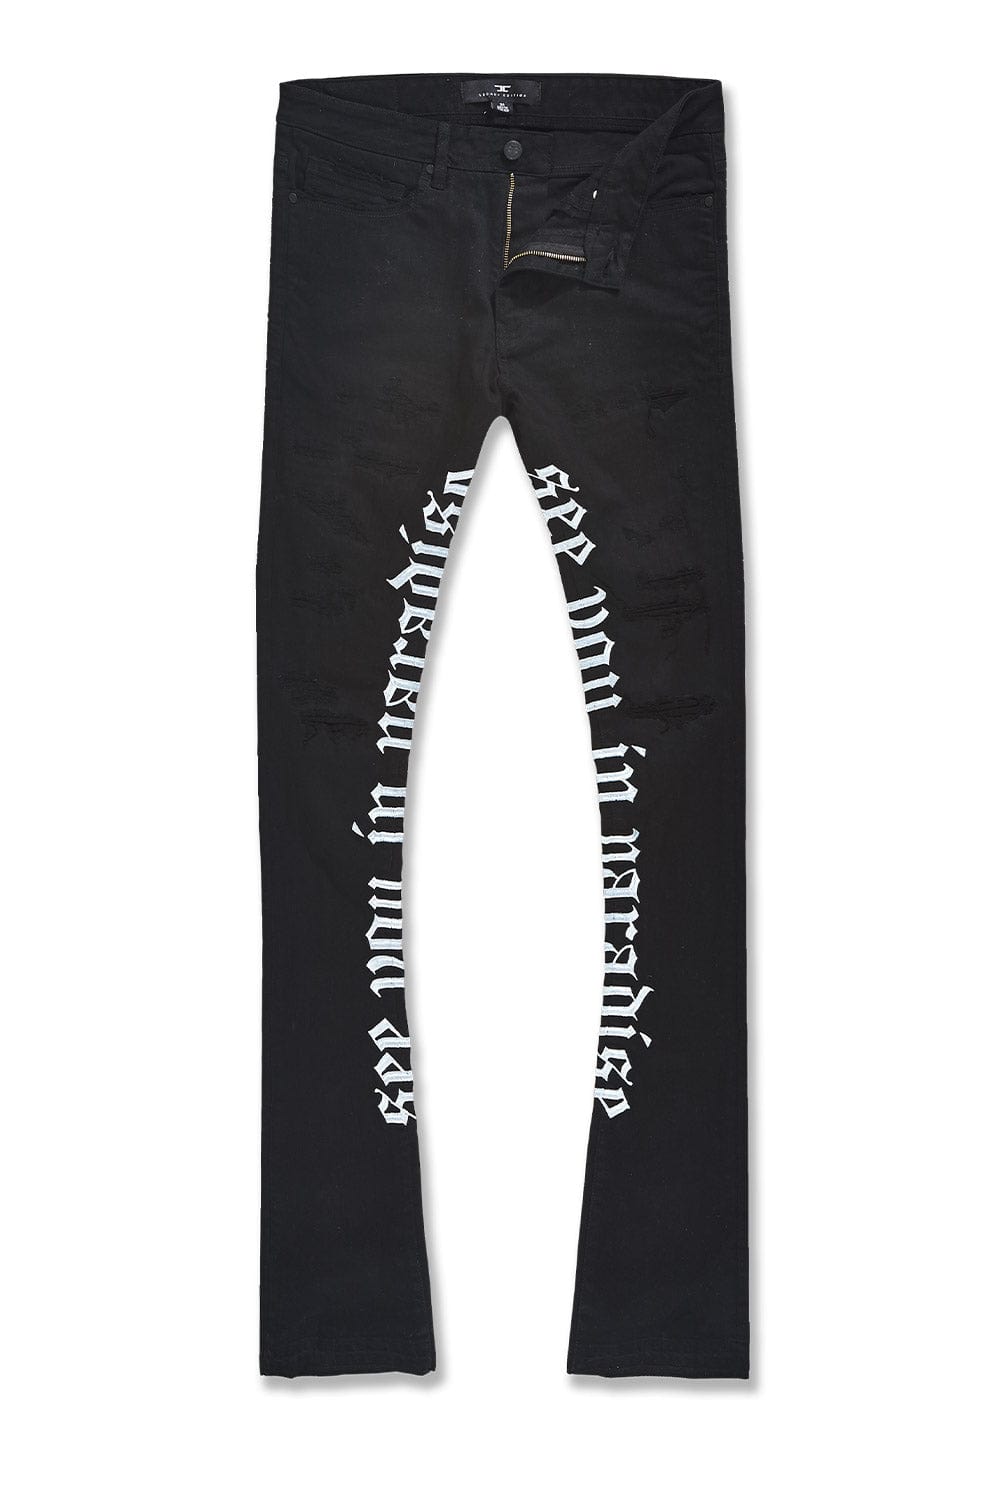 MARTIN STACKED - SEE YOU IN PARADISE DENIM (JET BLACK)